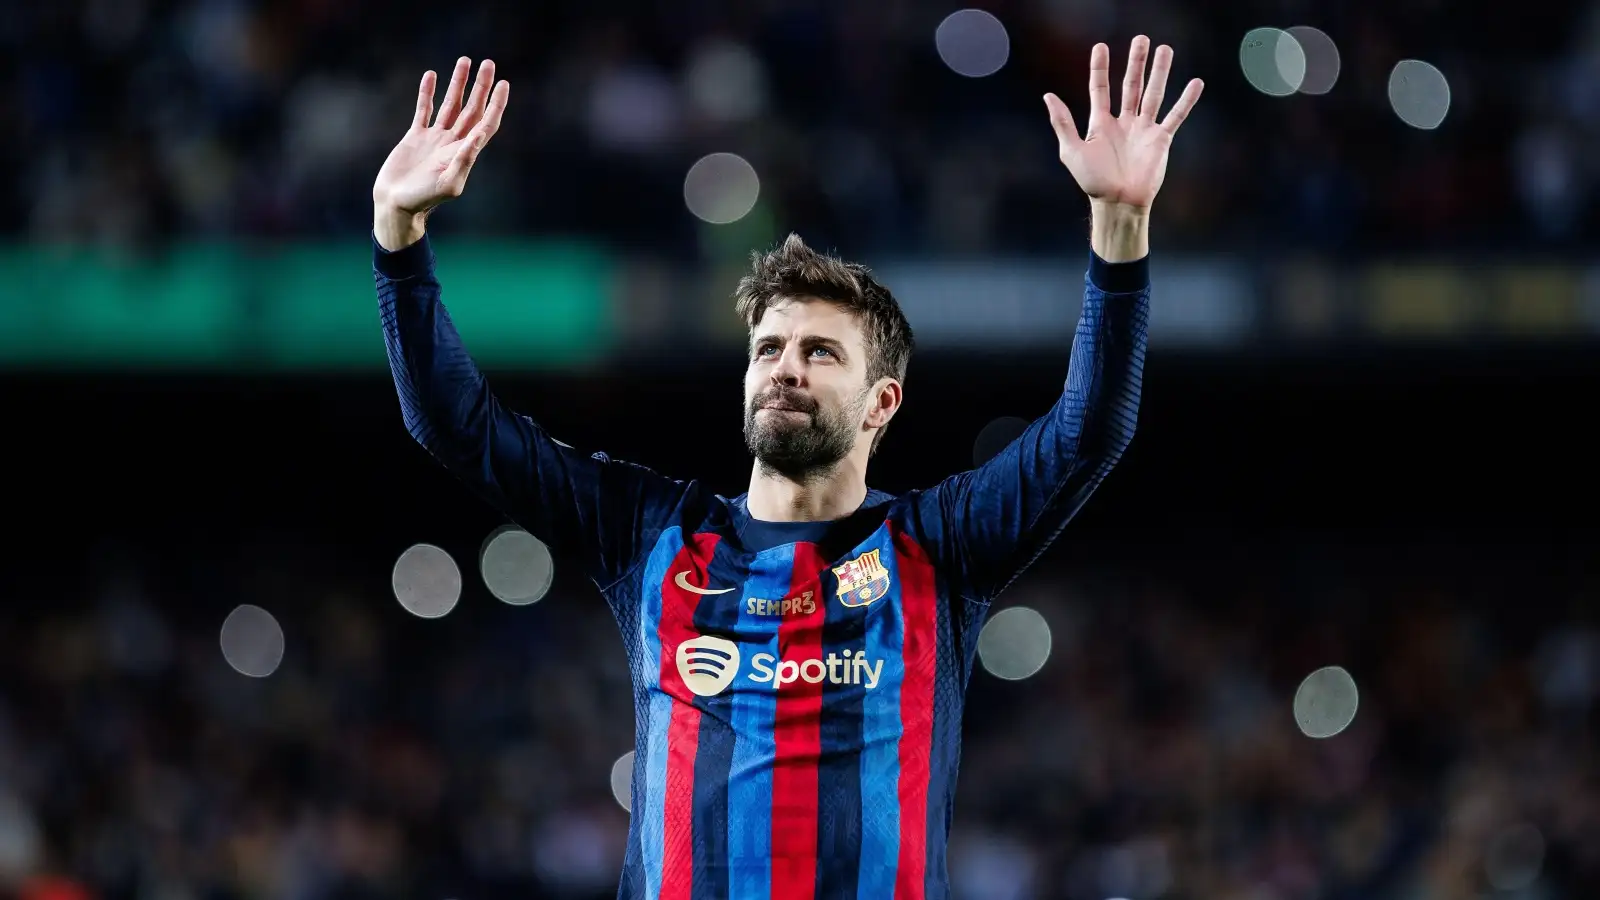 Watch: Gerard Pique hilariously sent off in final Barca match for dissent